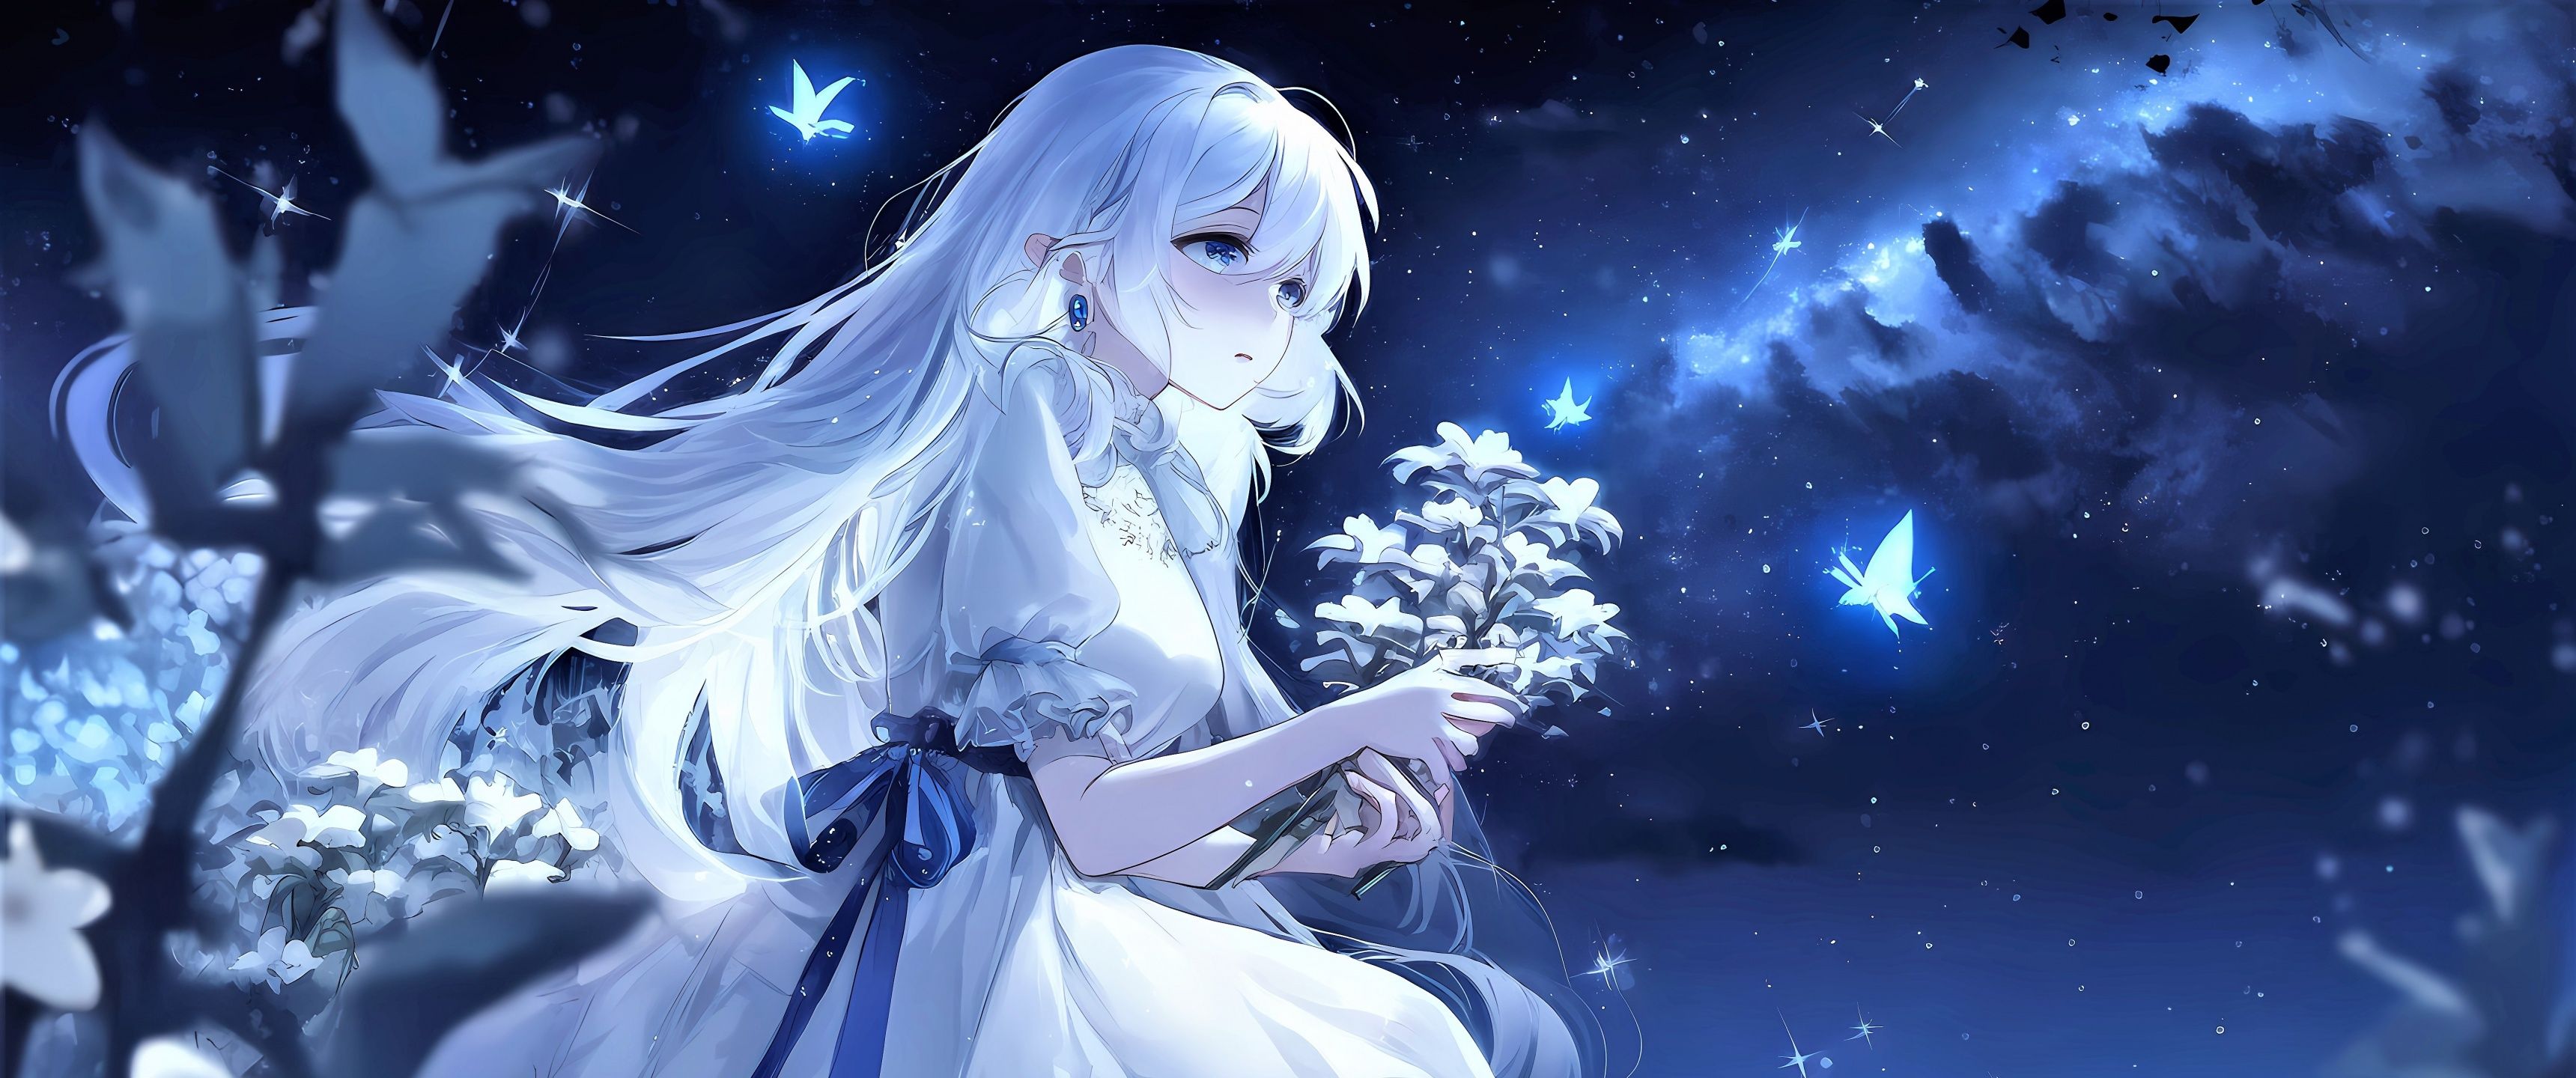 Anime girl with white hair holding flowers in the night sky - Anime girl